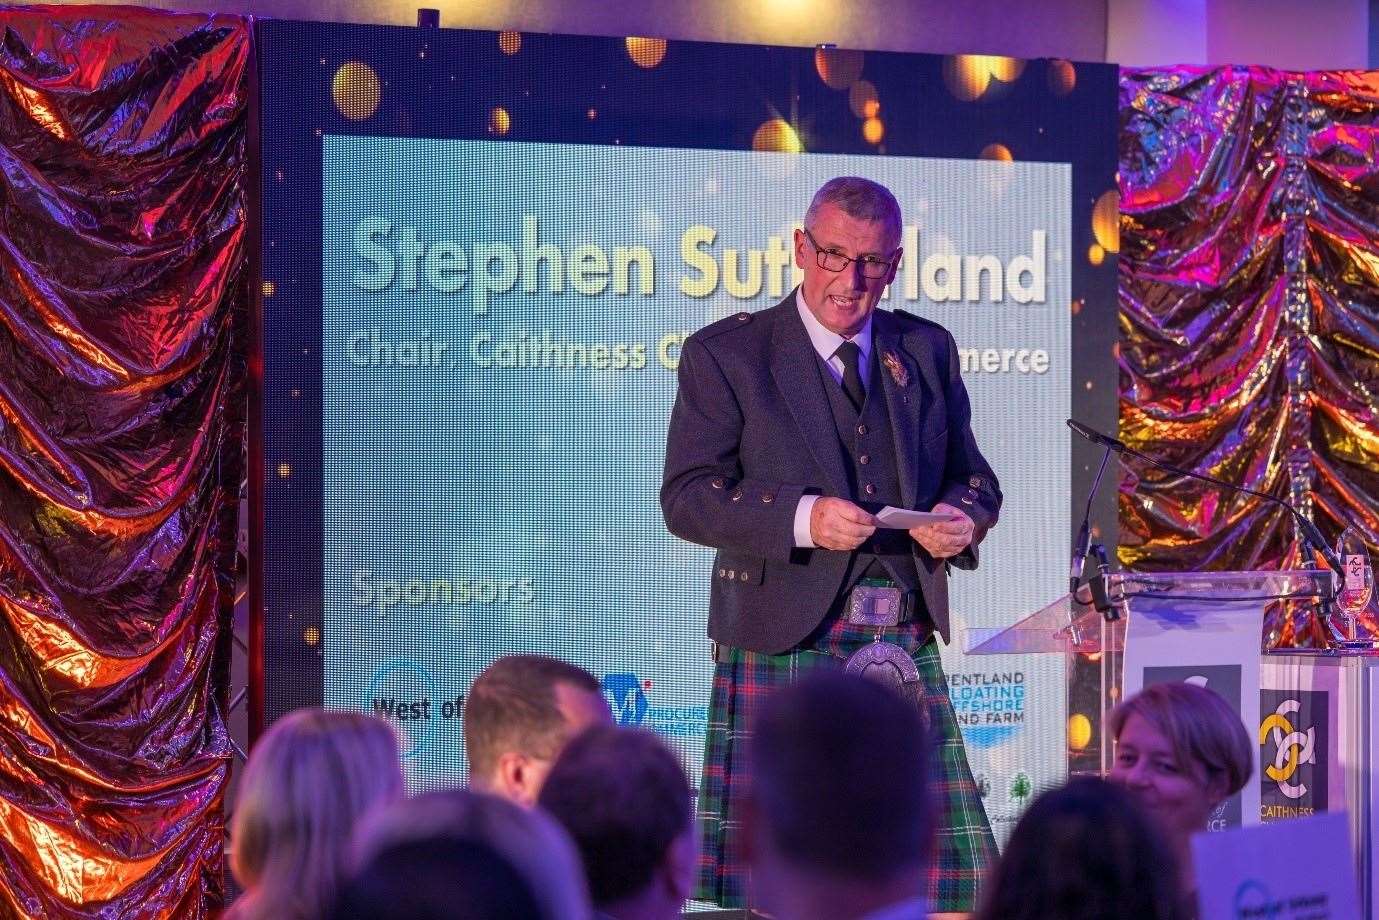 Stephen Sutherland at the Caithness Chamber of Commerce's 49th annual dinner.